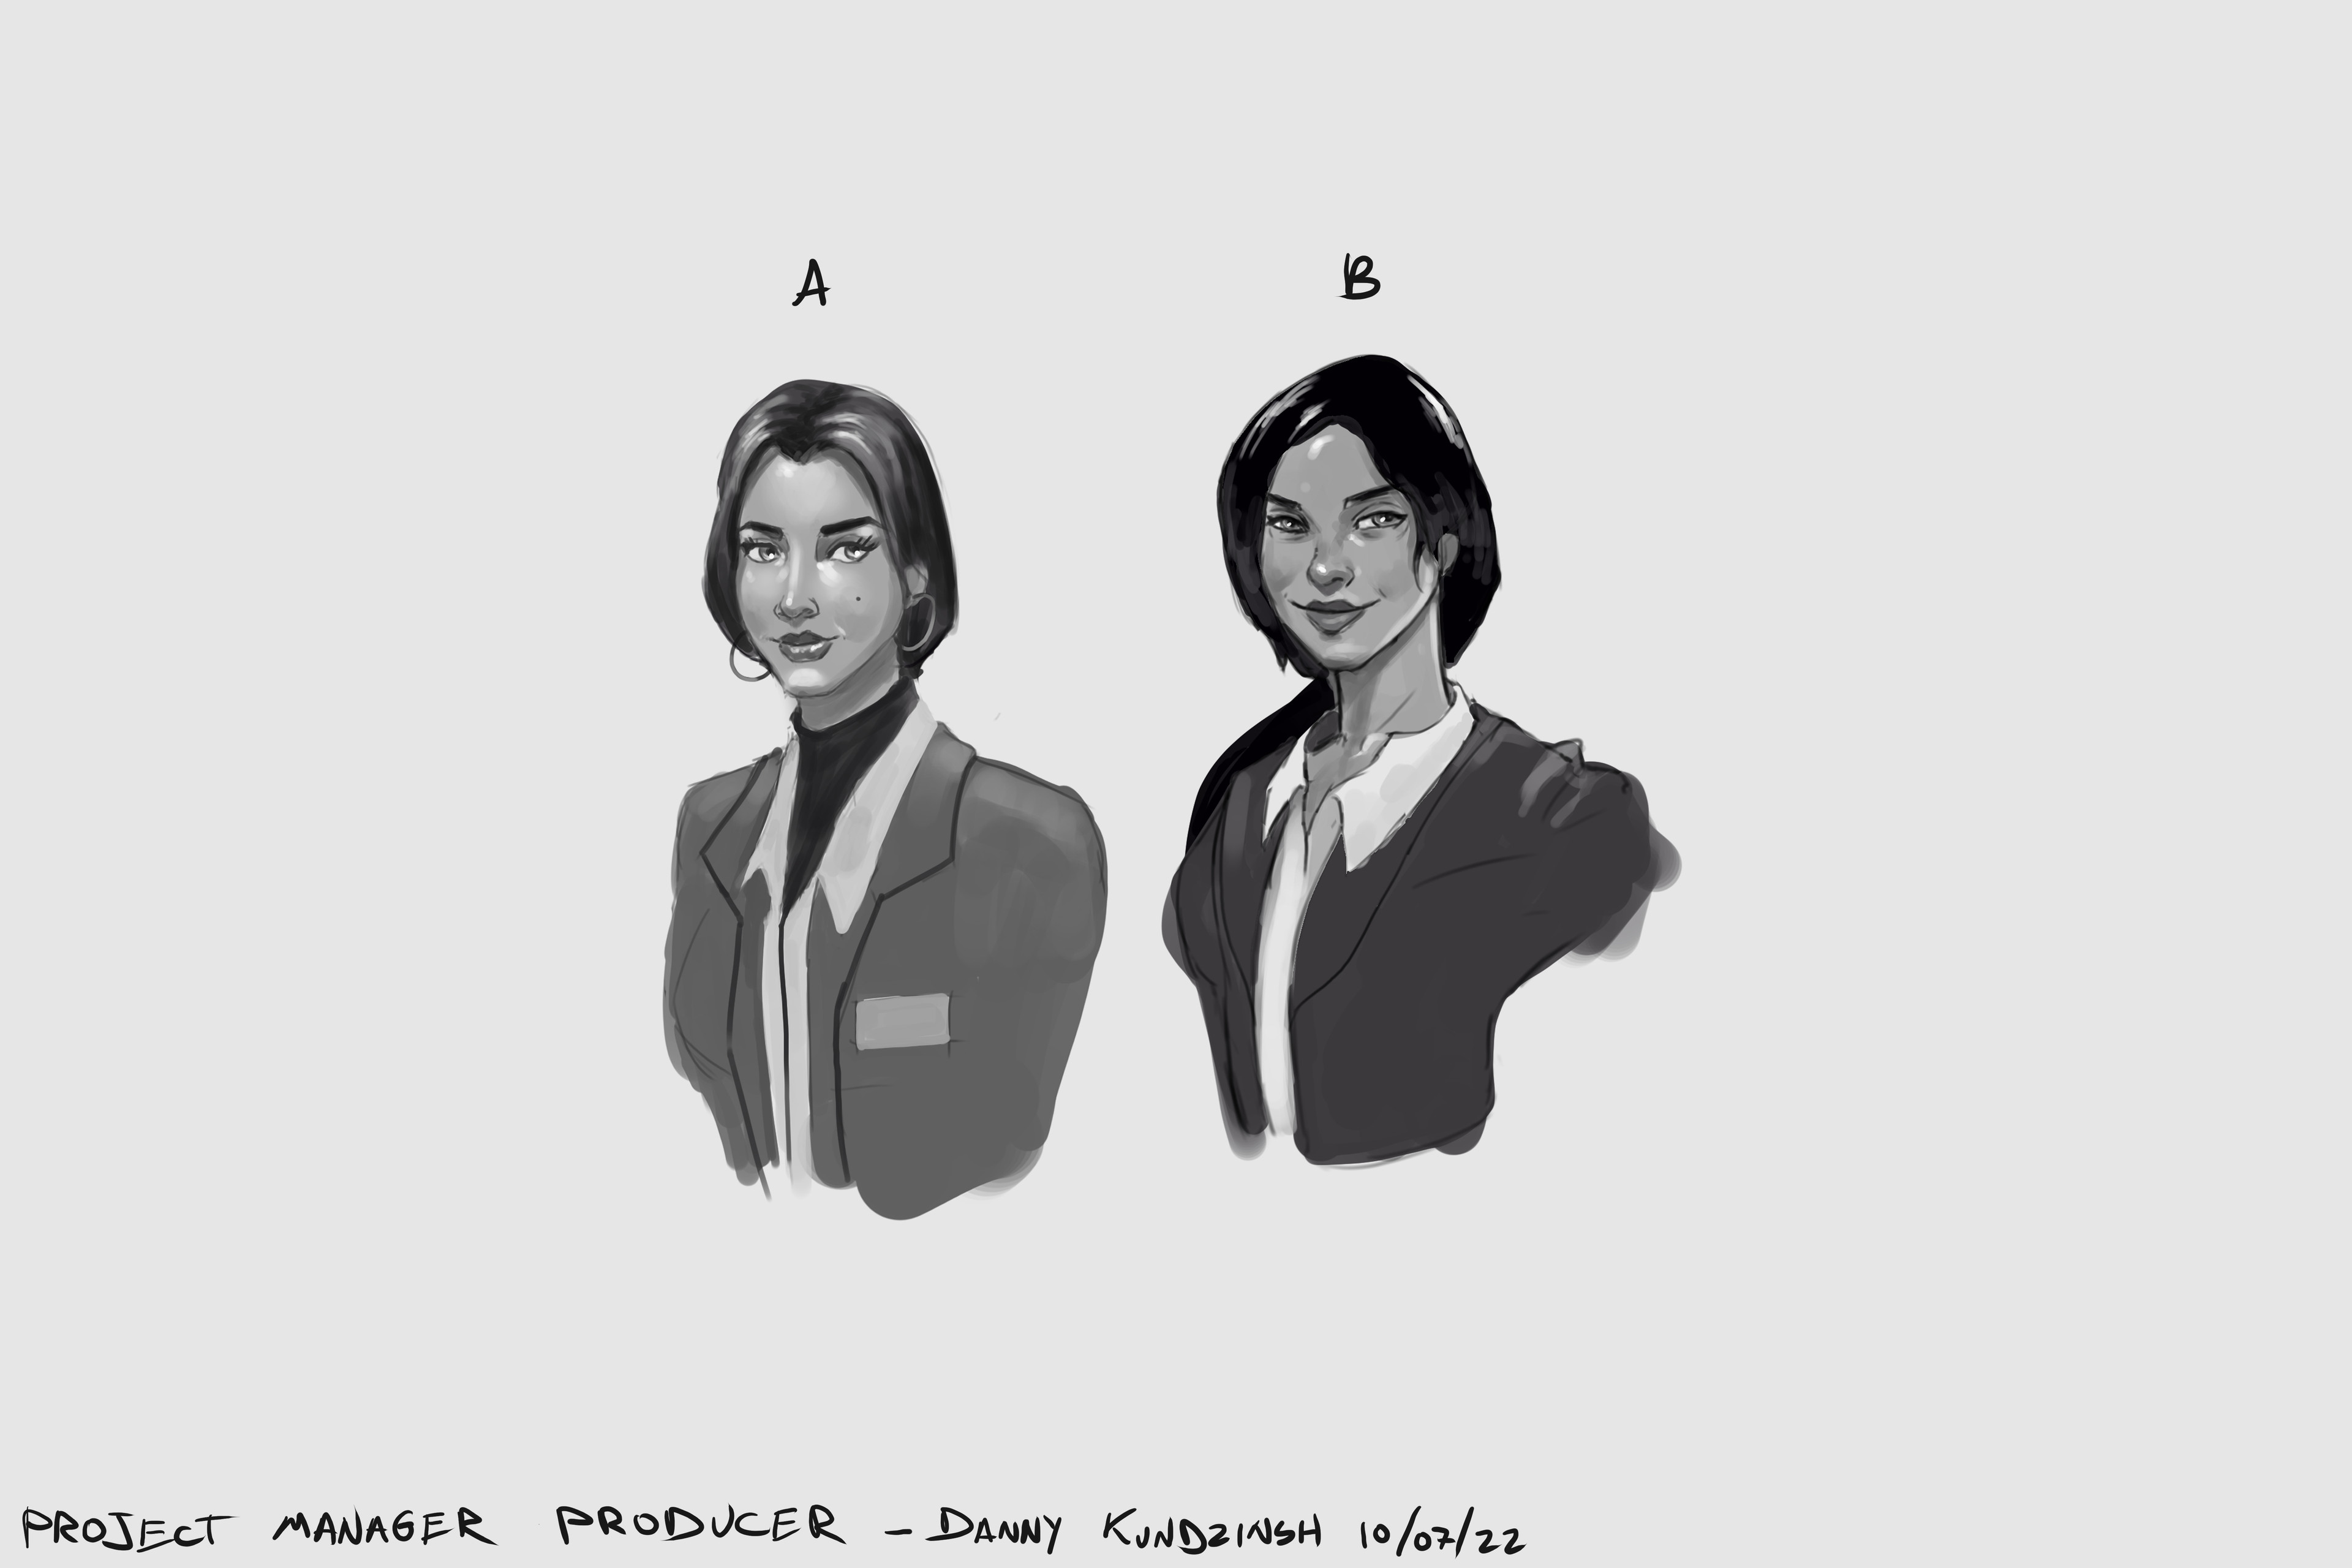 Project manager exploration sketches 